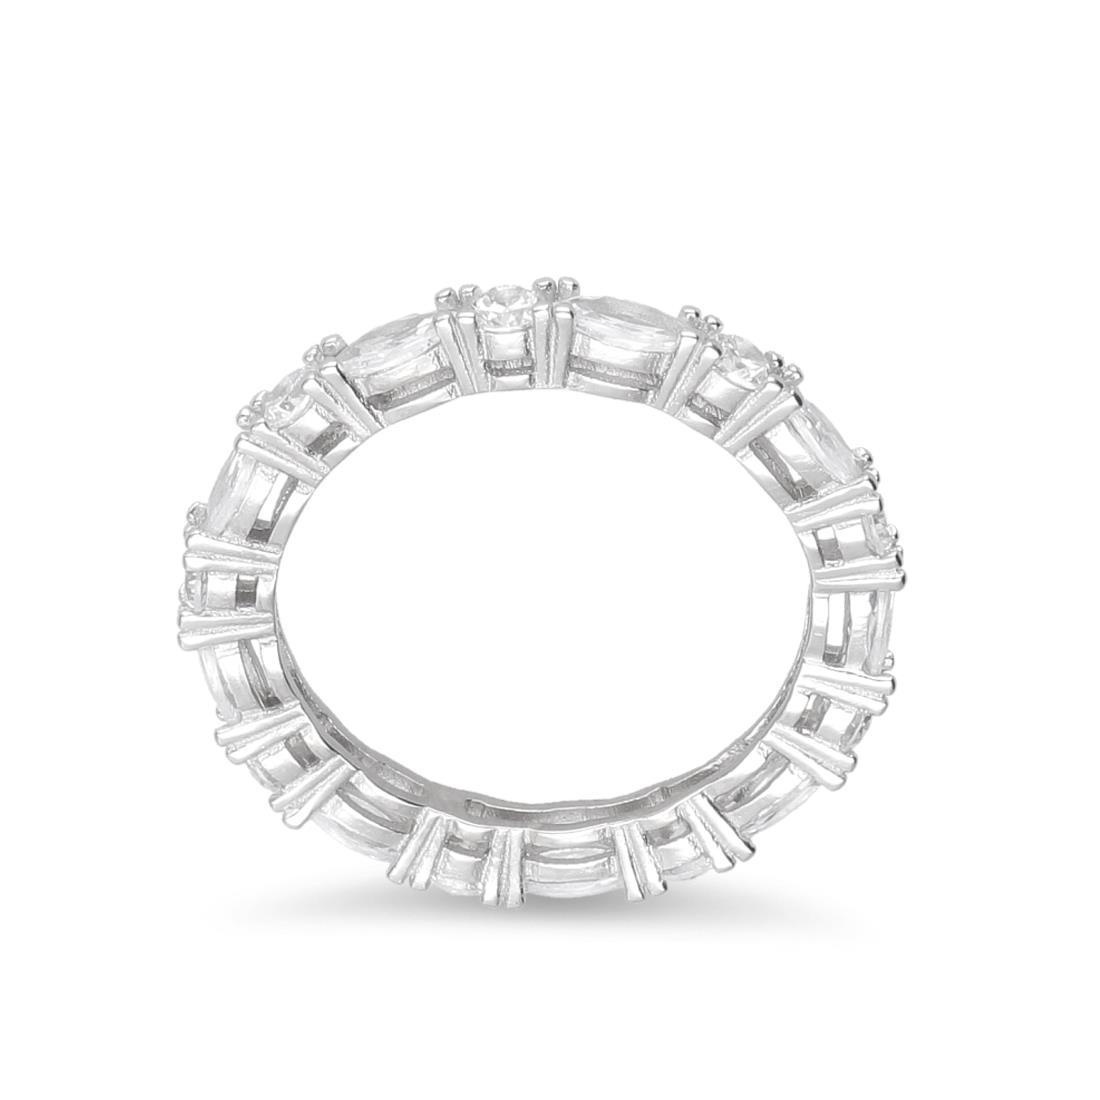 Silver eternity ring with white zircons - LUXURY MILANO